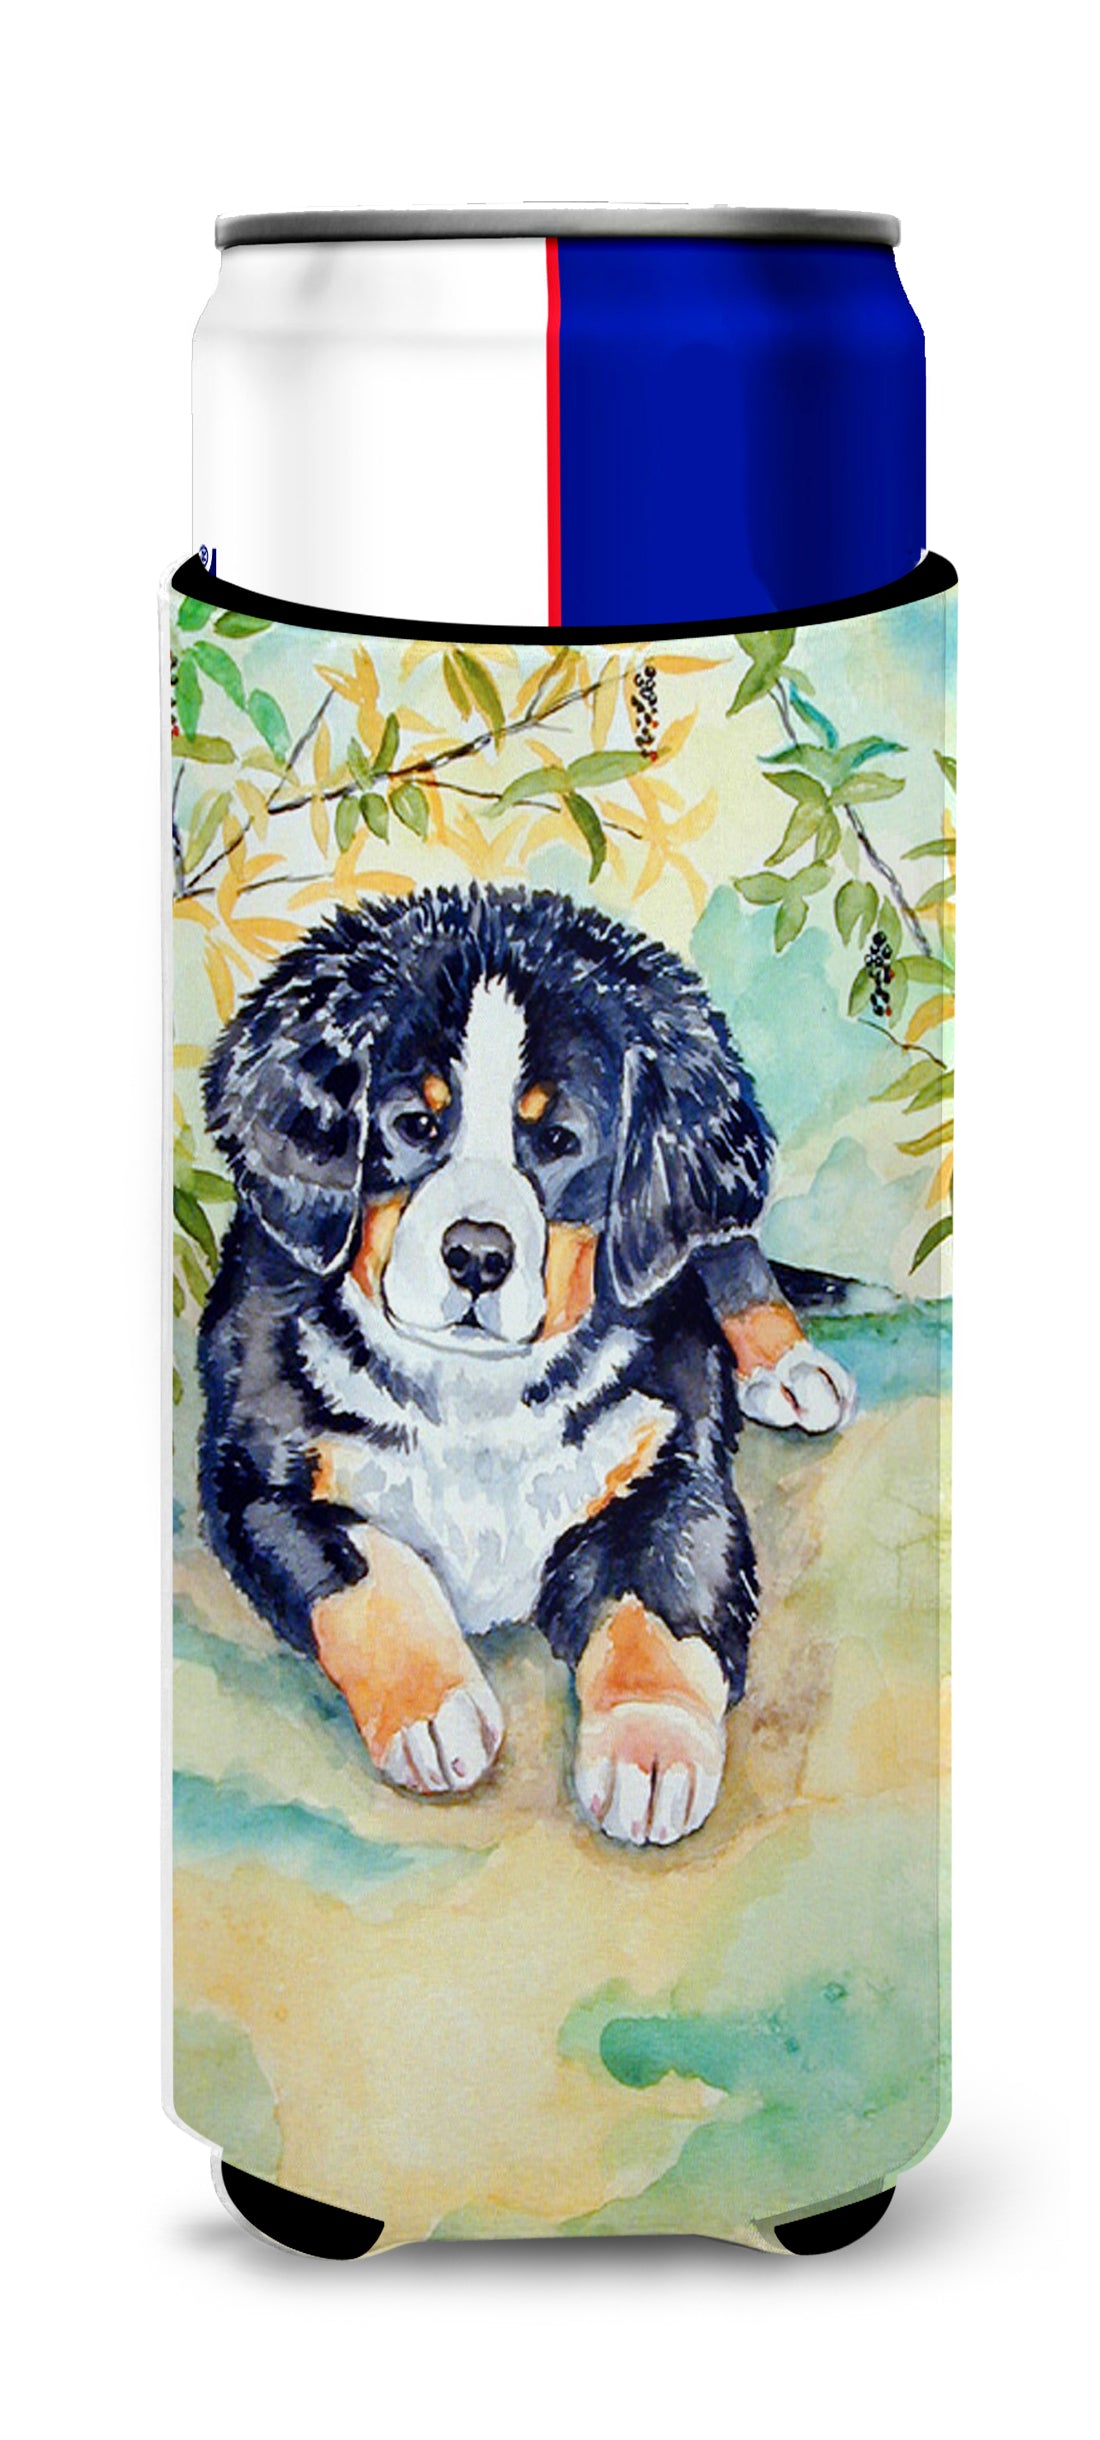 Bernese Mountain Dog Puppy Ultra Beverage Insulators for slim cans 7010MUK.